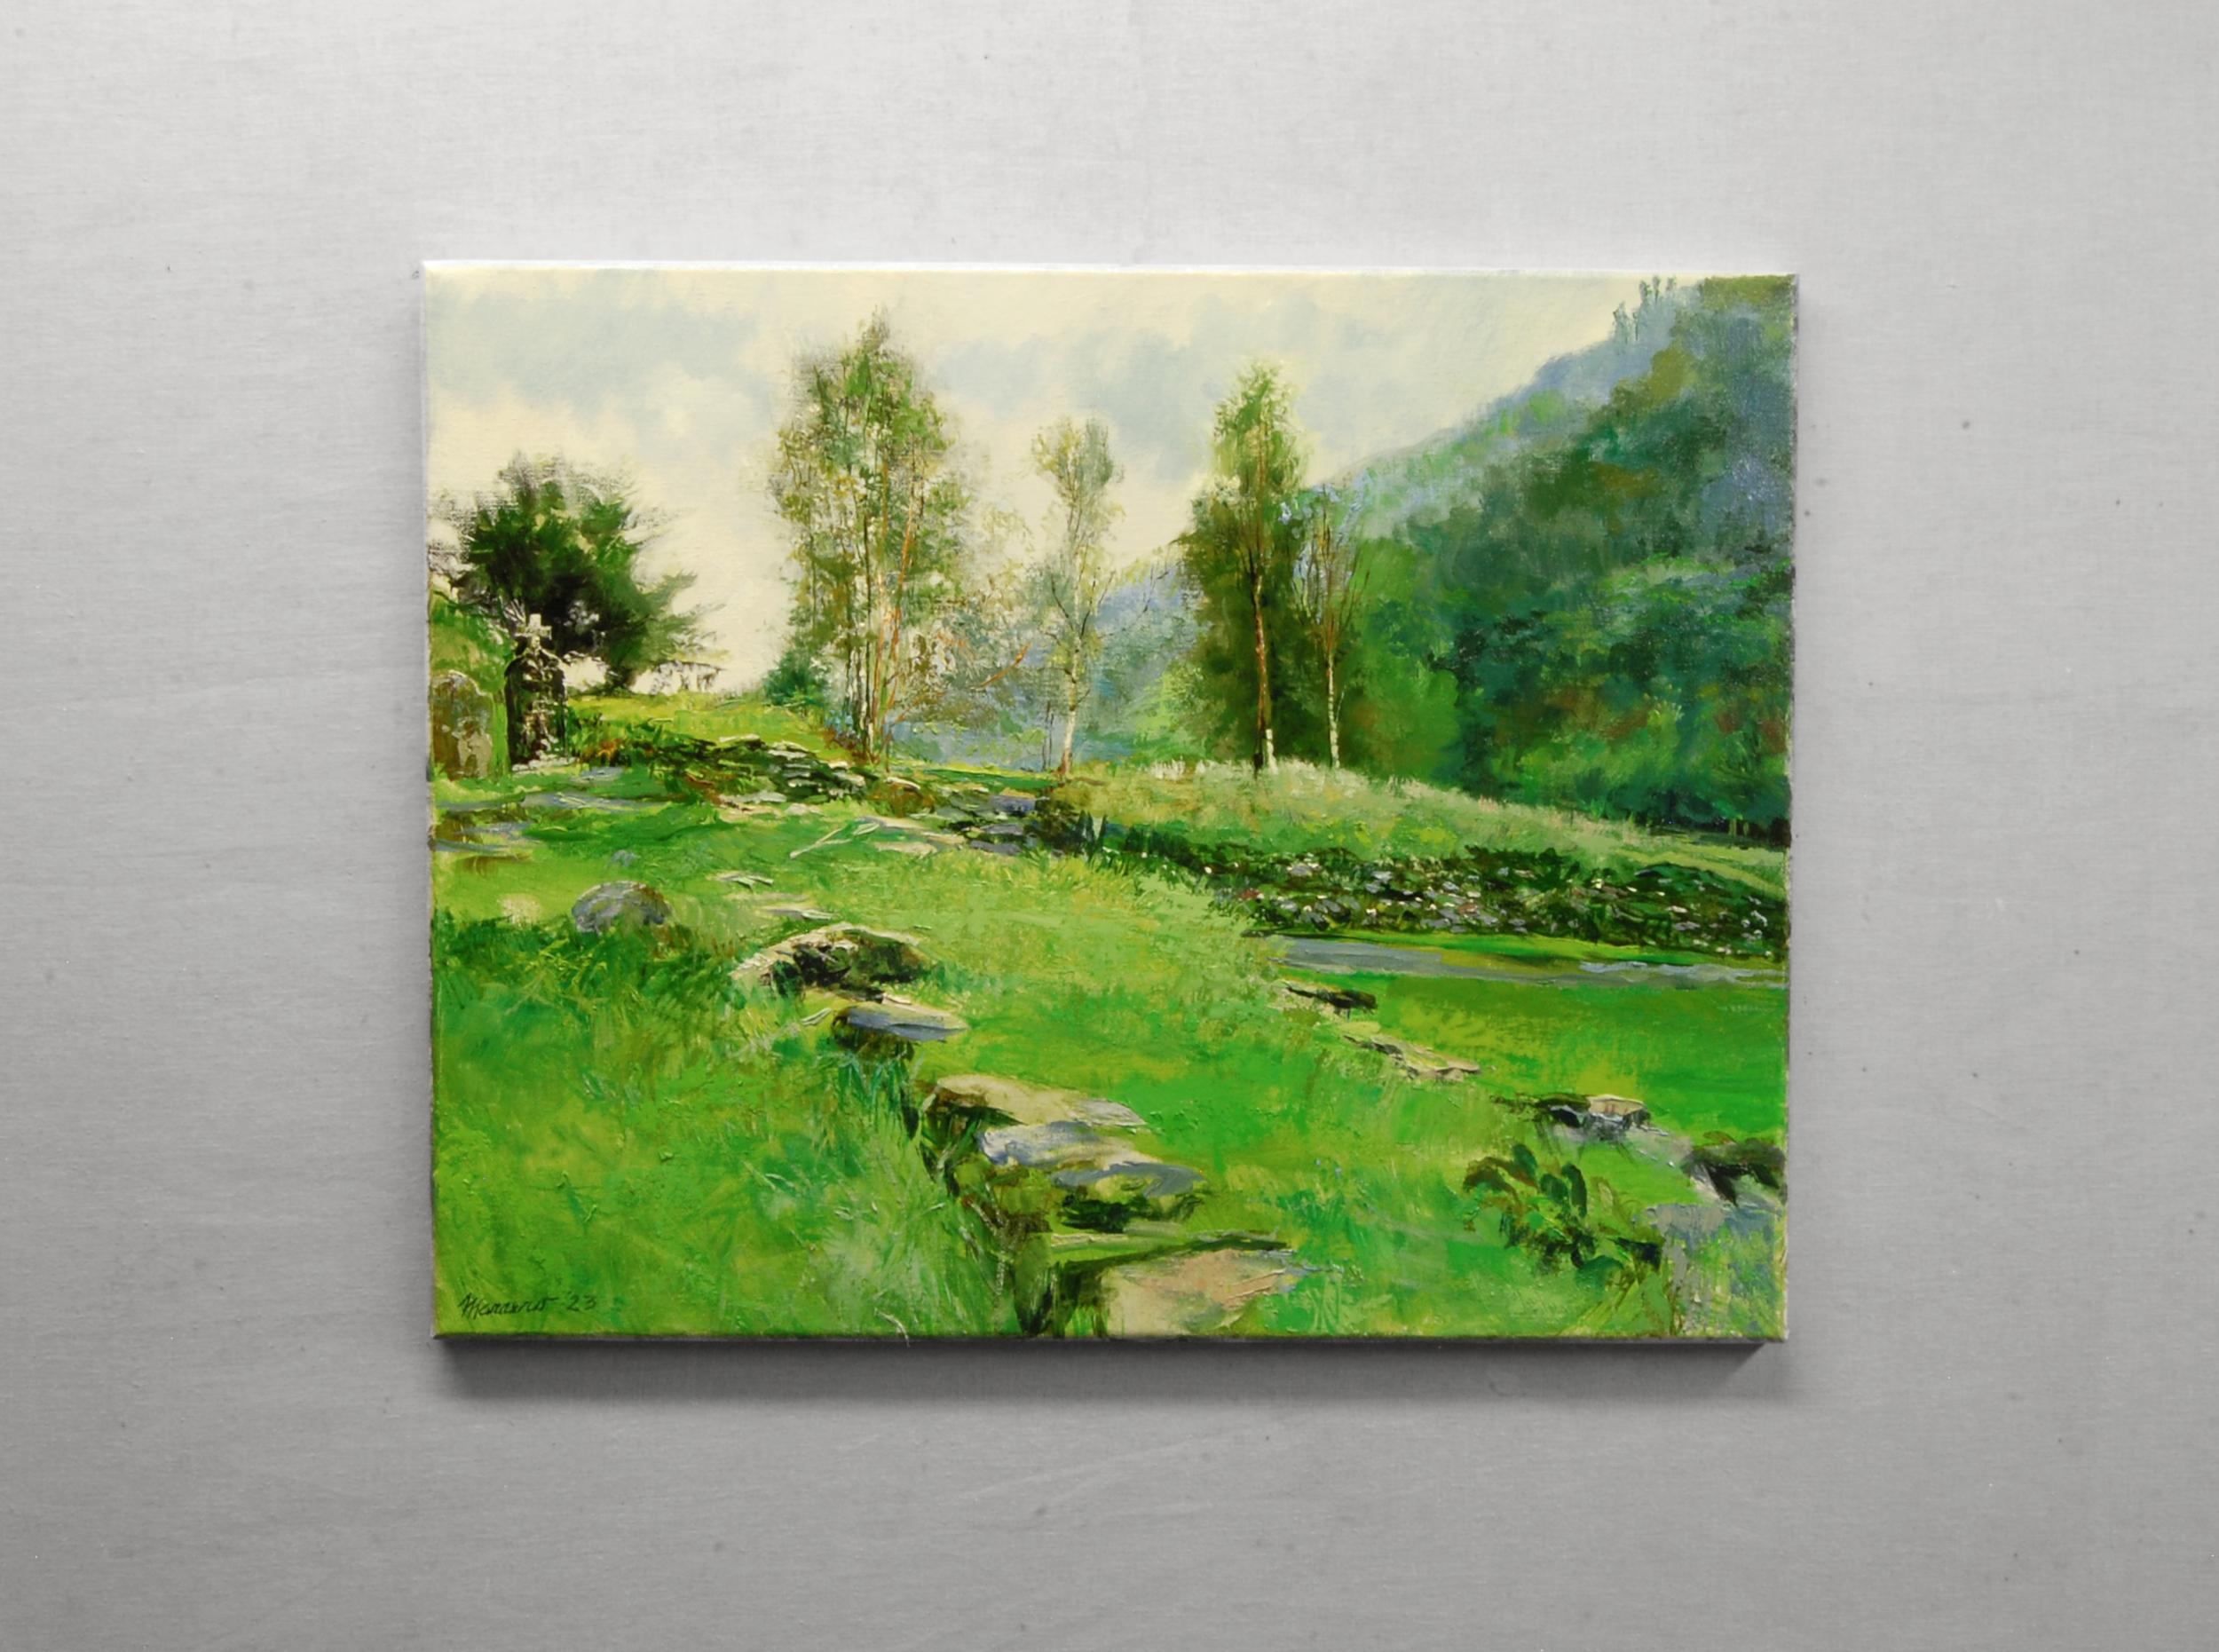 <p>Artist Comments<br>As low-lying clouds blanket the surrounding hills, artist Onelio Marrero captures the tranquil allure of the Glendalough Monastery in Ireland on a rainy day. 